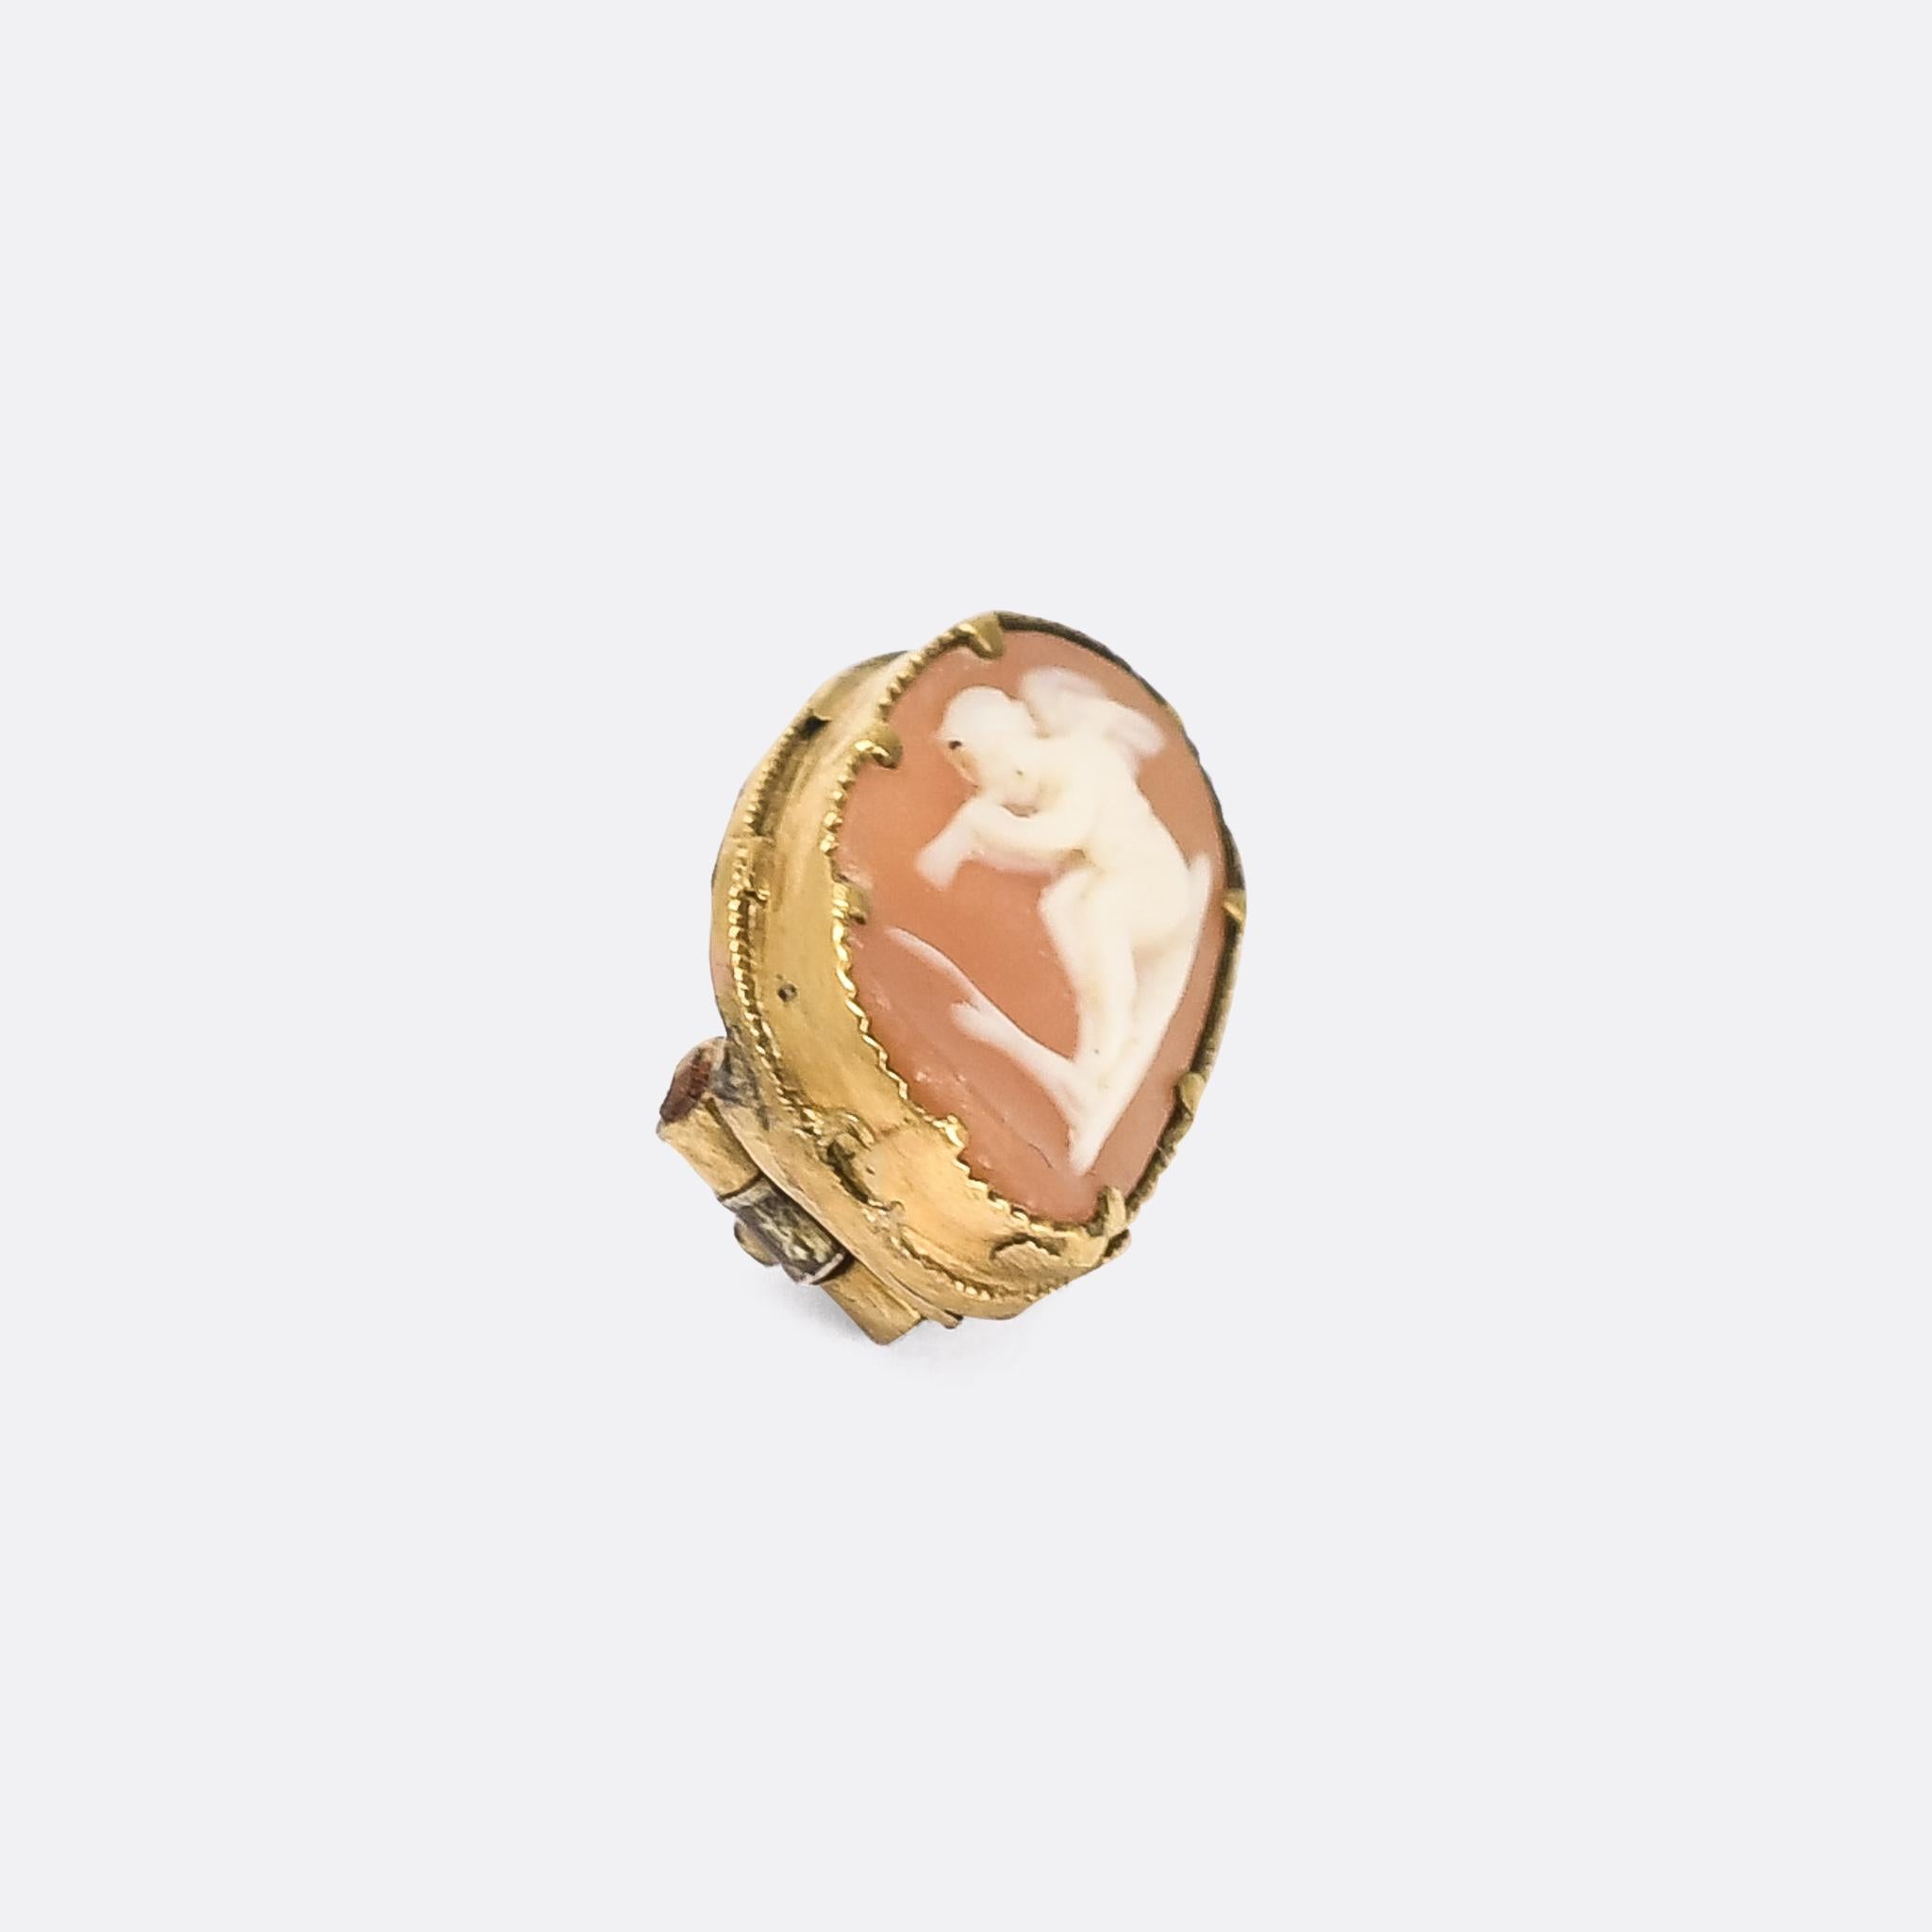 A tiny Georgian cameo brooch dating from the 1820s. The hardstone agate has been carved to depict Eros (or Cupid) playing the flute, and it's mounted in 15k gold.

STONES 
Hardstone Cameo

MEASUREMENTS 
14.5 x 9.8mm

WEIGHT 
1.2g

MARKS 
No marks